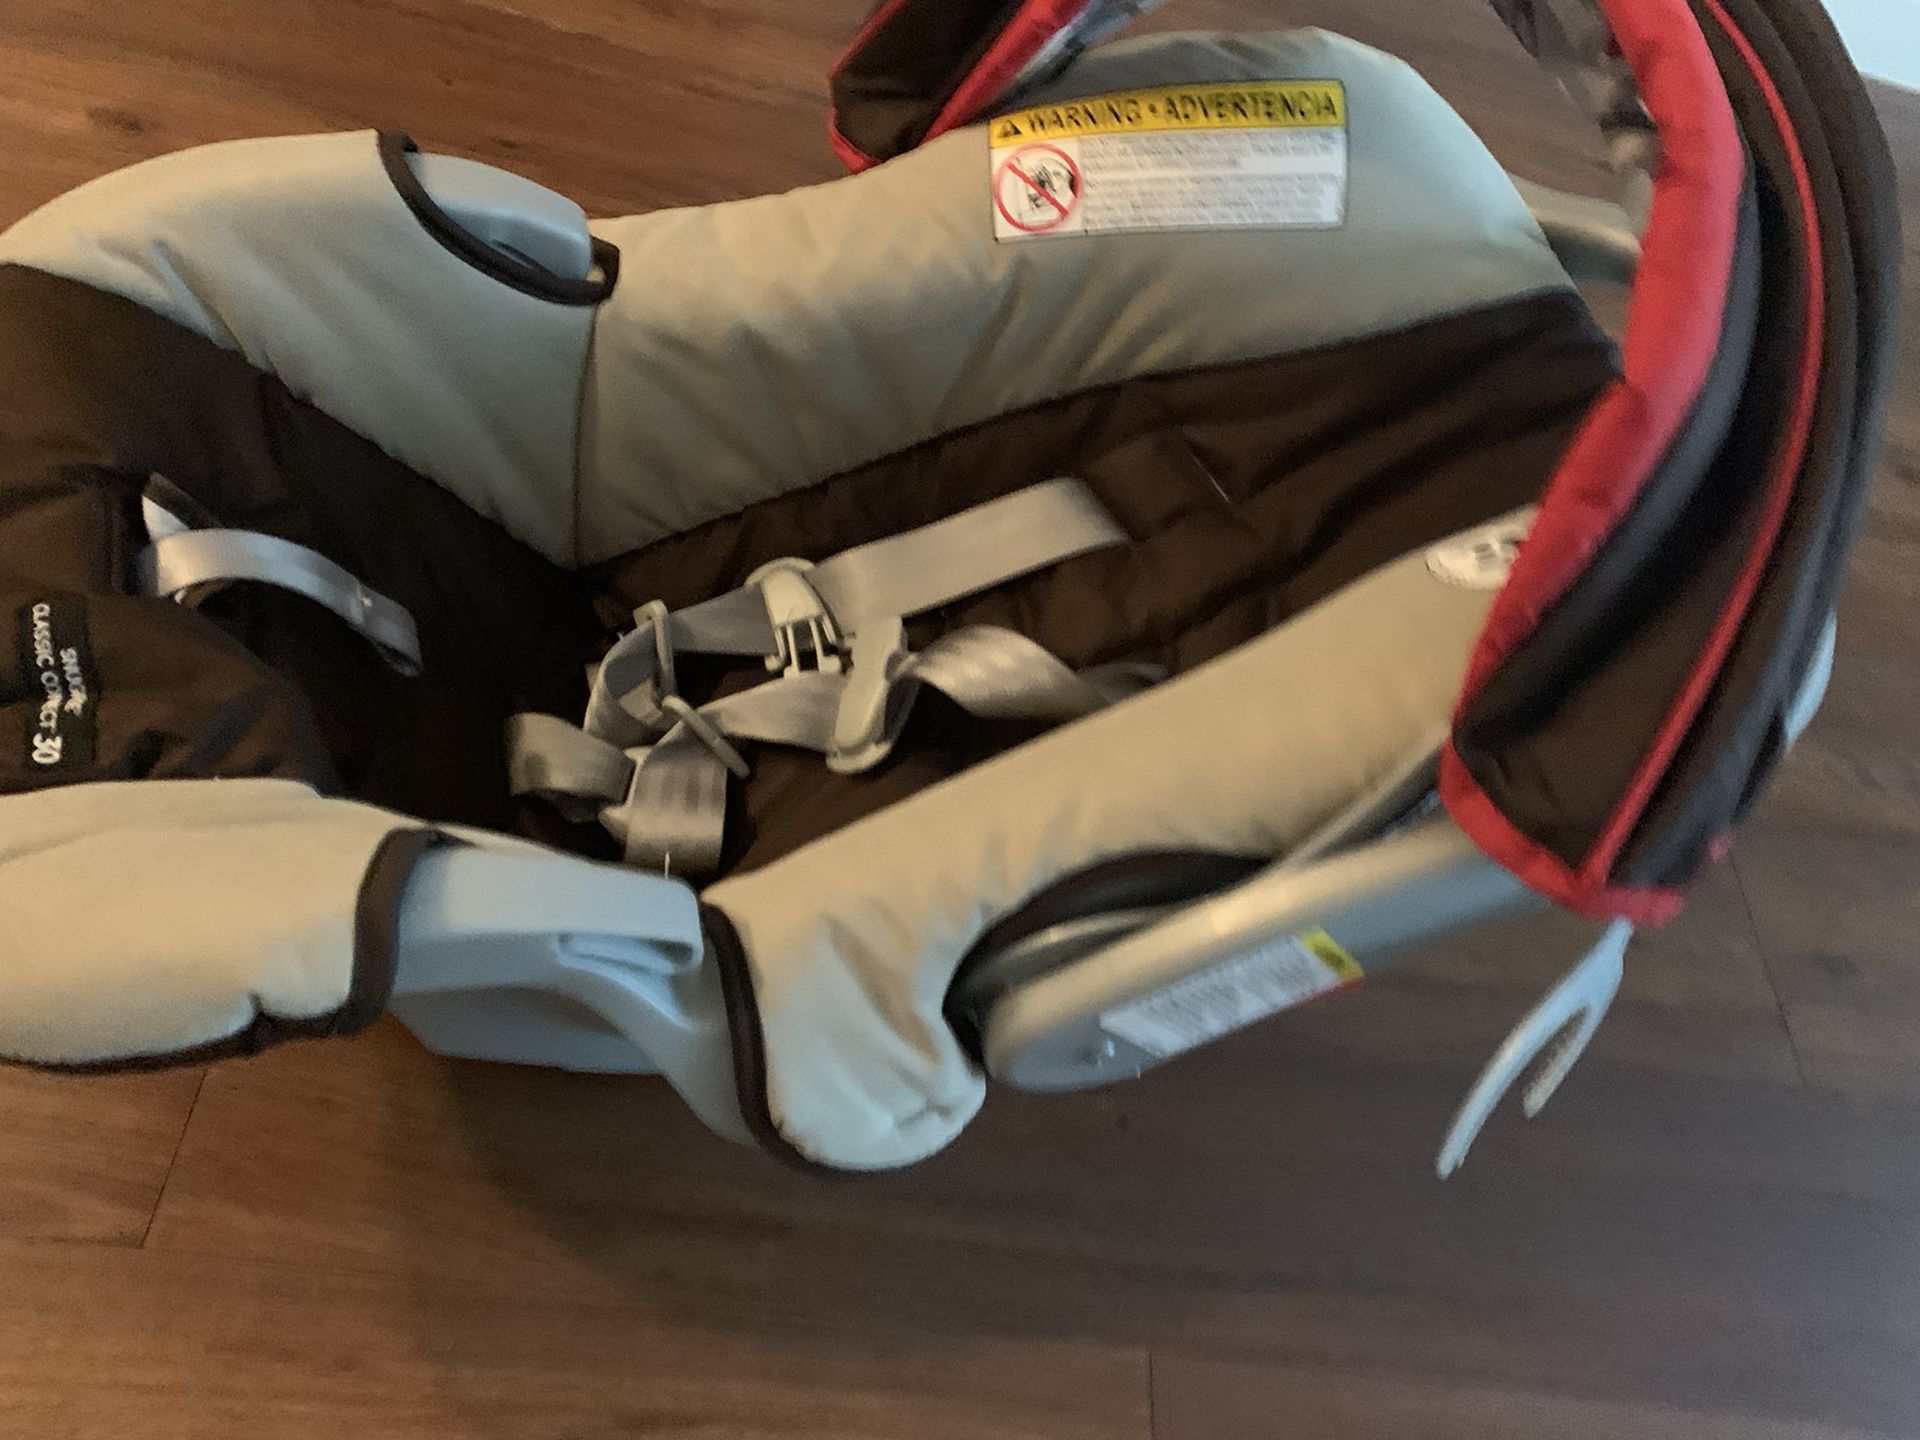 New born car seat never used